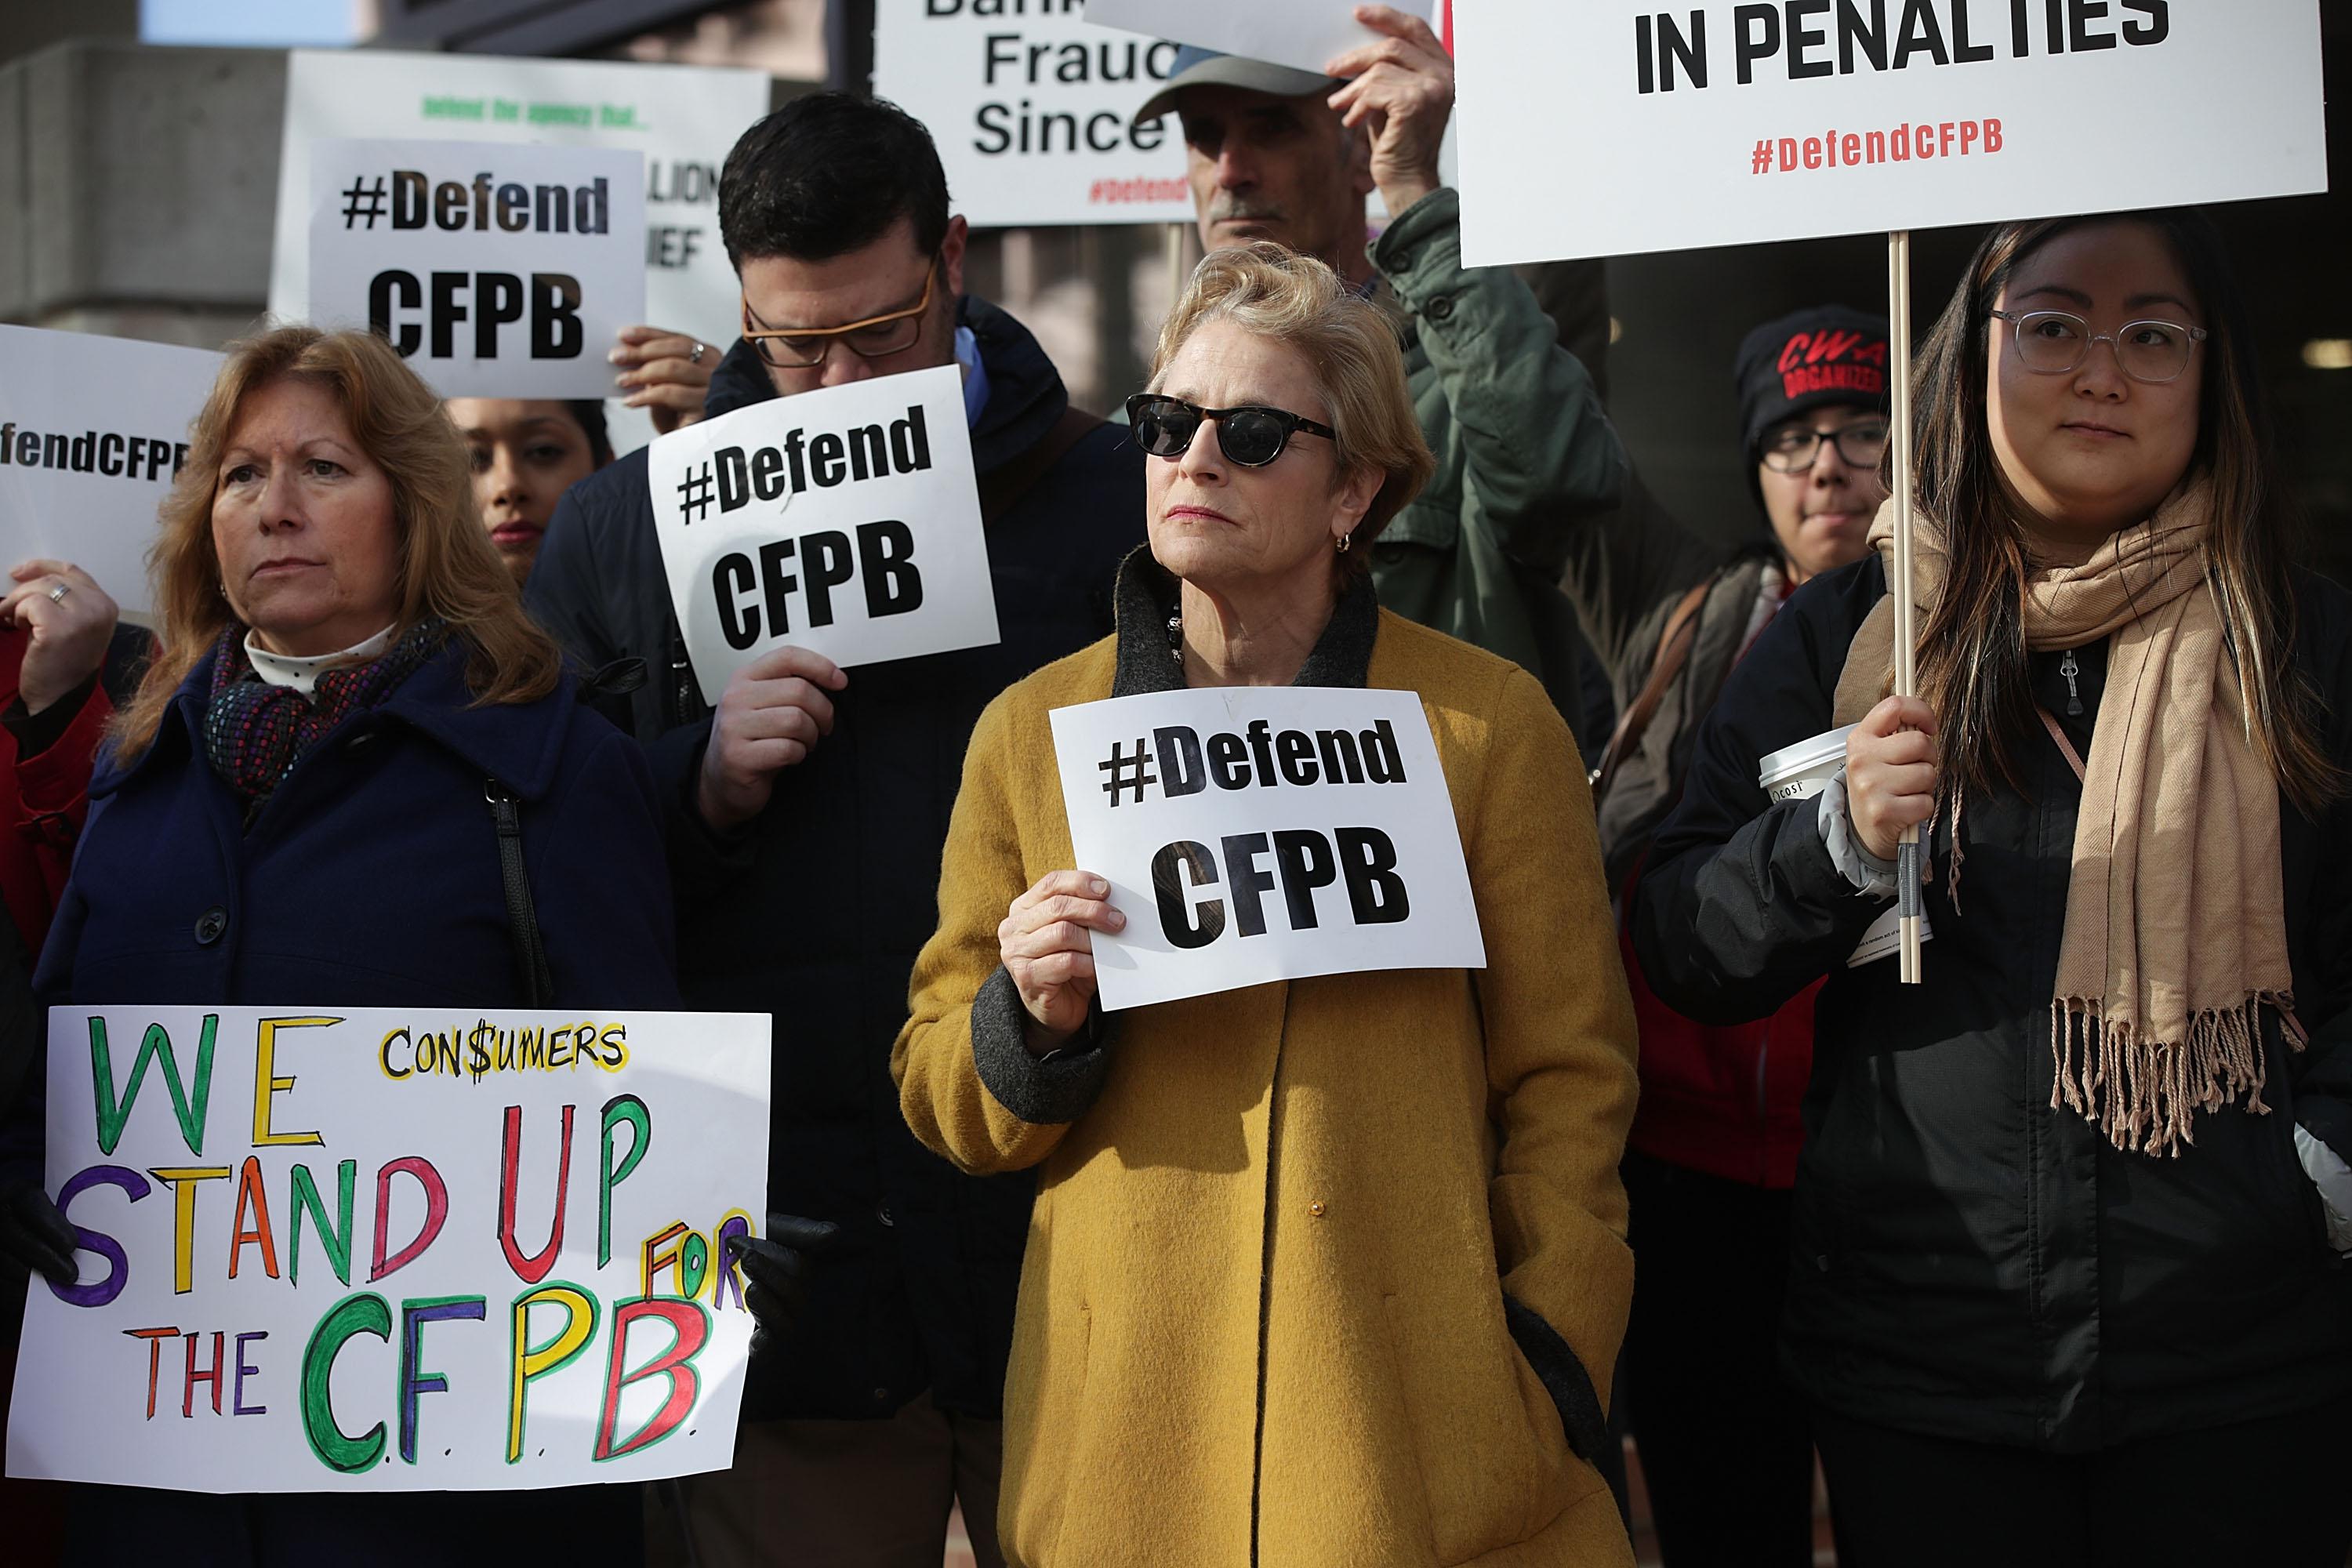 A crowd of protesters holding up signs defending the CFPB